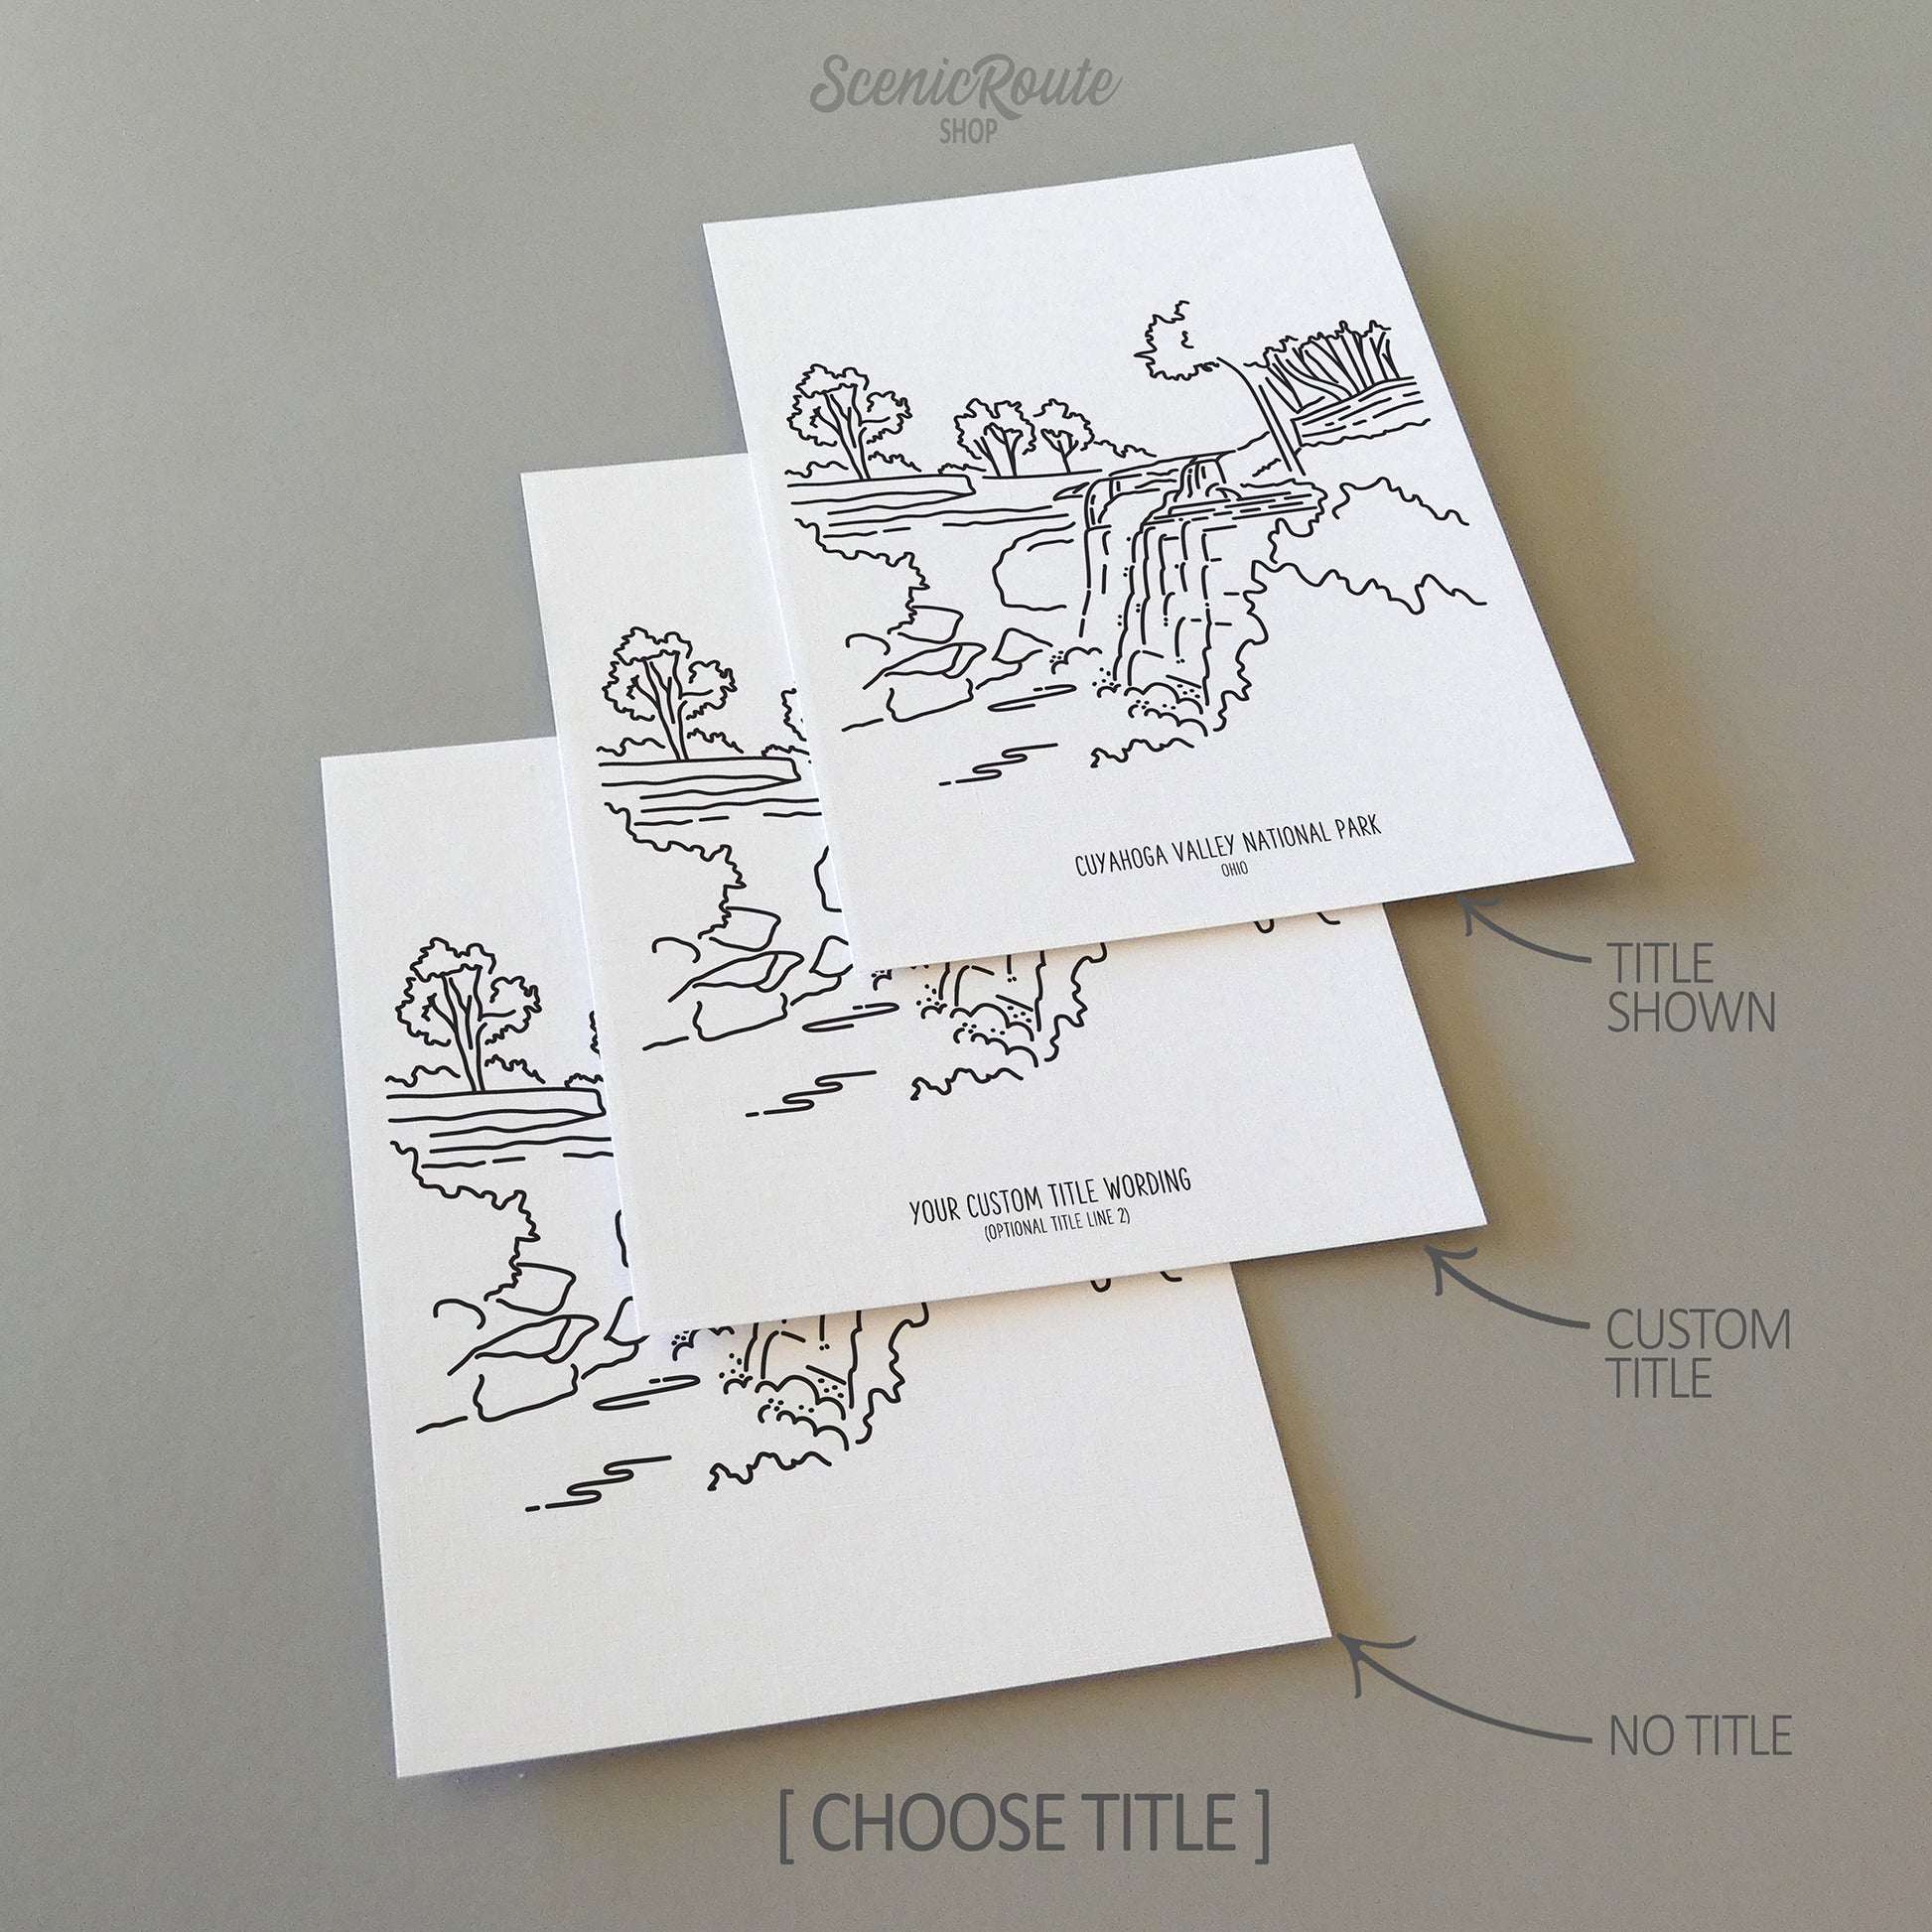 Three line art drawings of Cuyahoga Valley National Park on white linen paper with a gray background. The pieces are shown with title options that can be chosen and personalized.